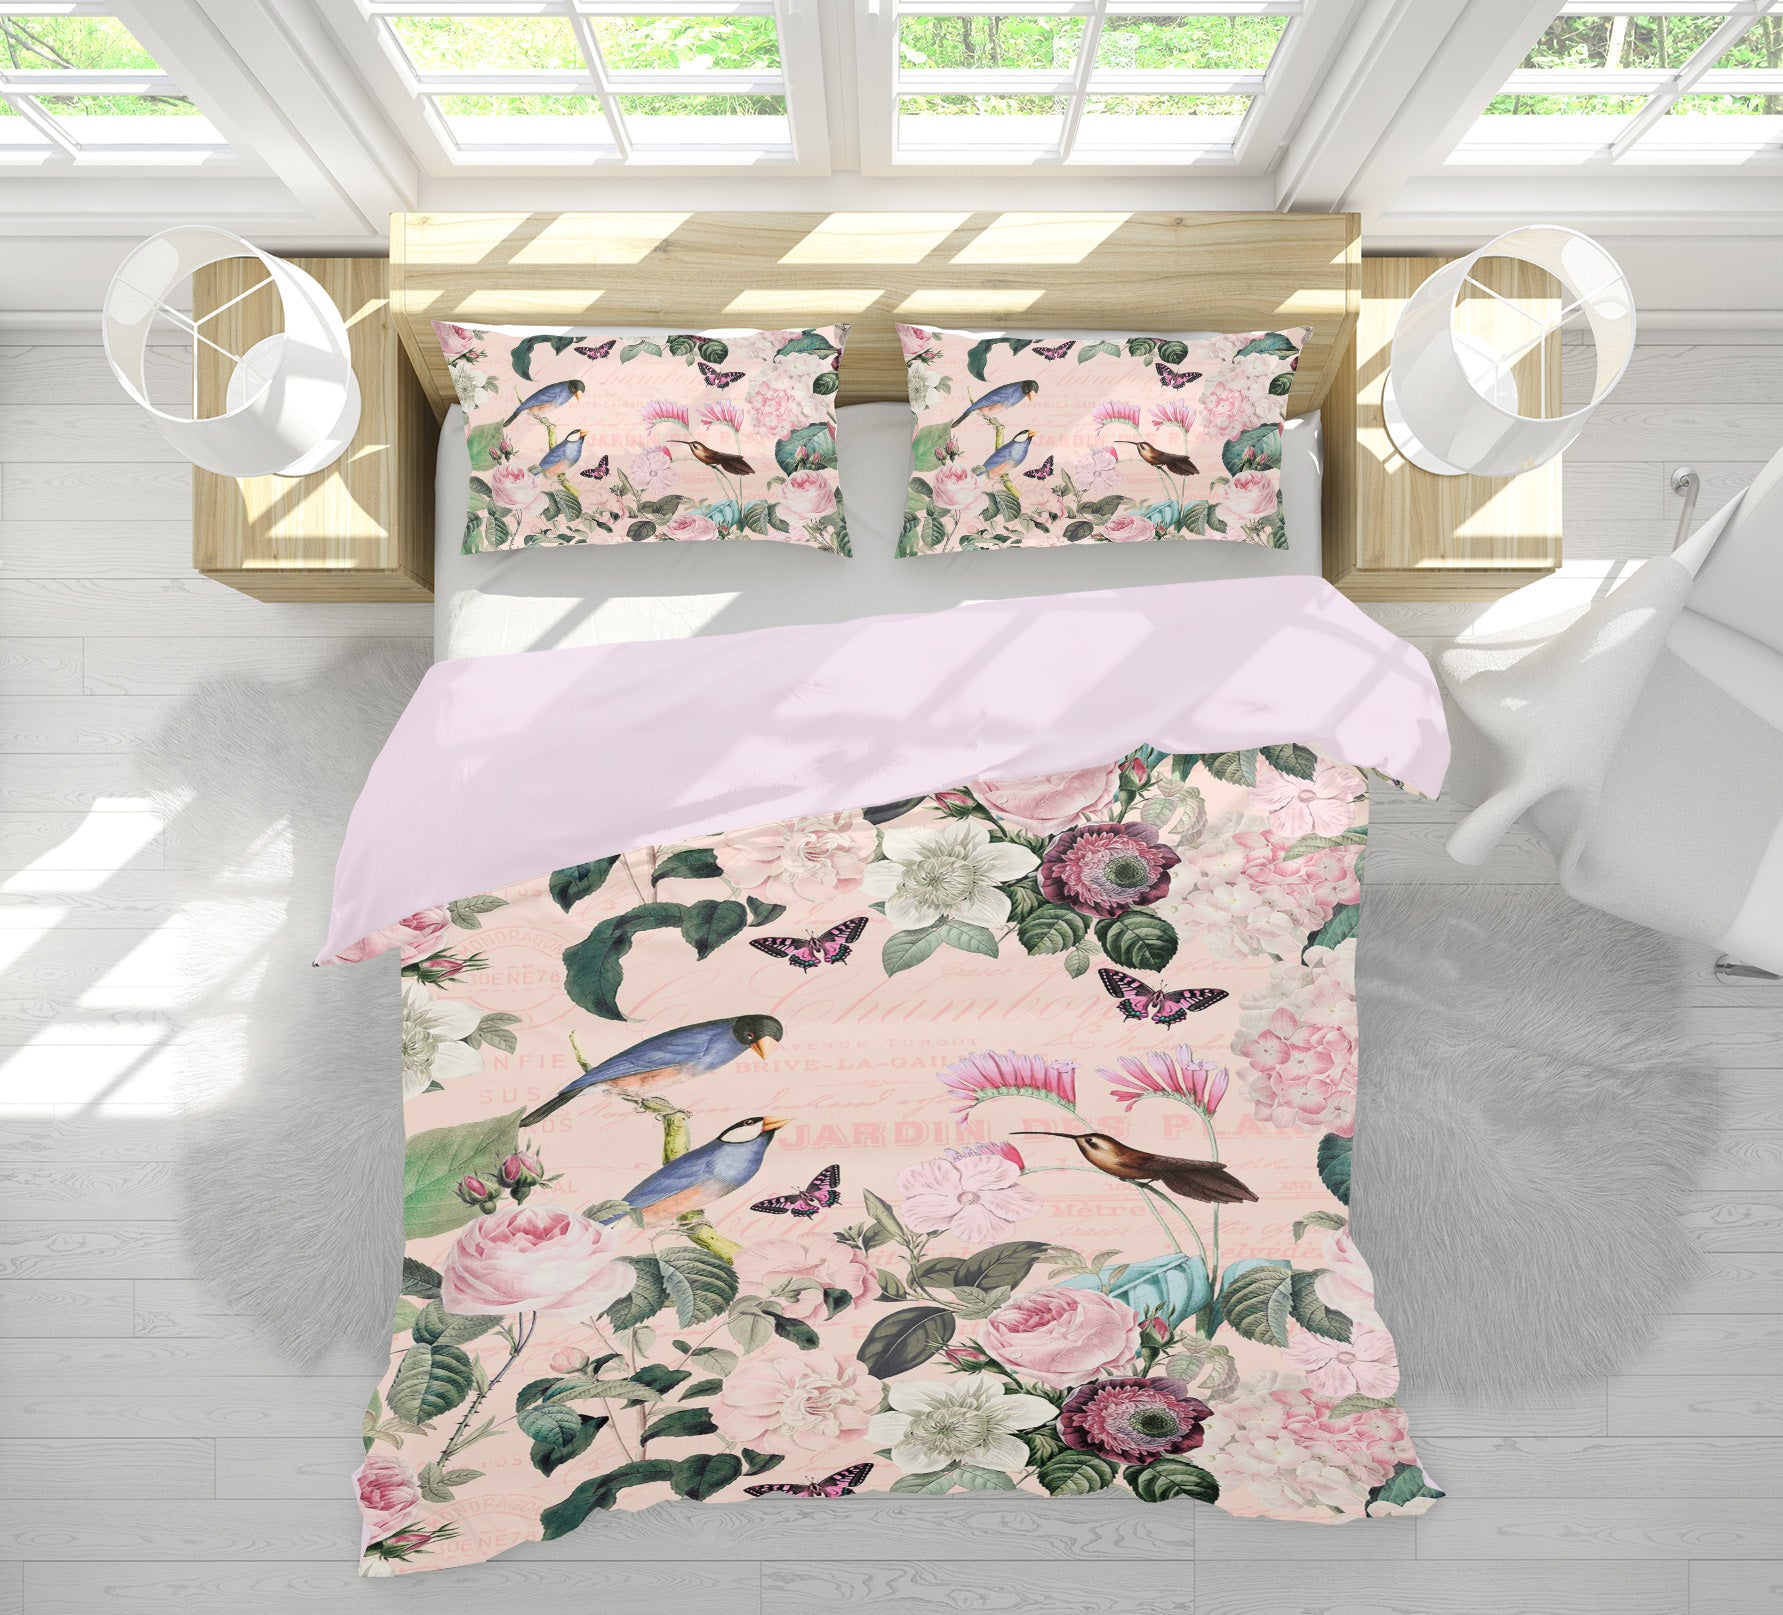 3D Flowers Leaves 118 Andrea haase Bedding Bed Pillowcases Quilt